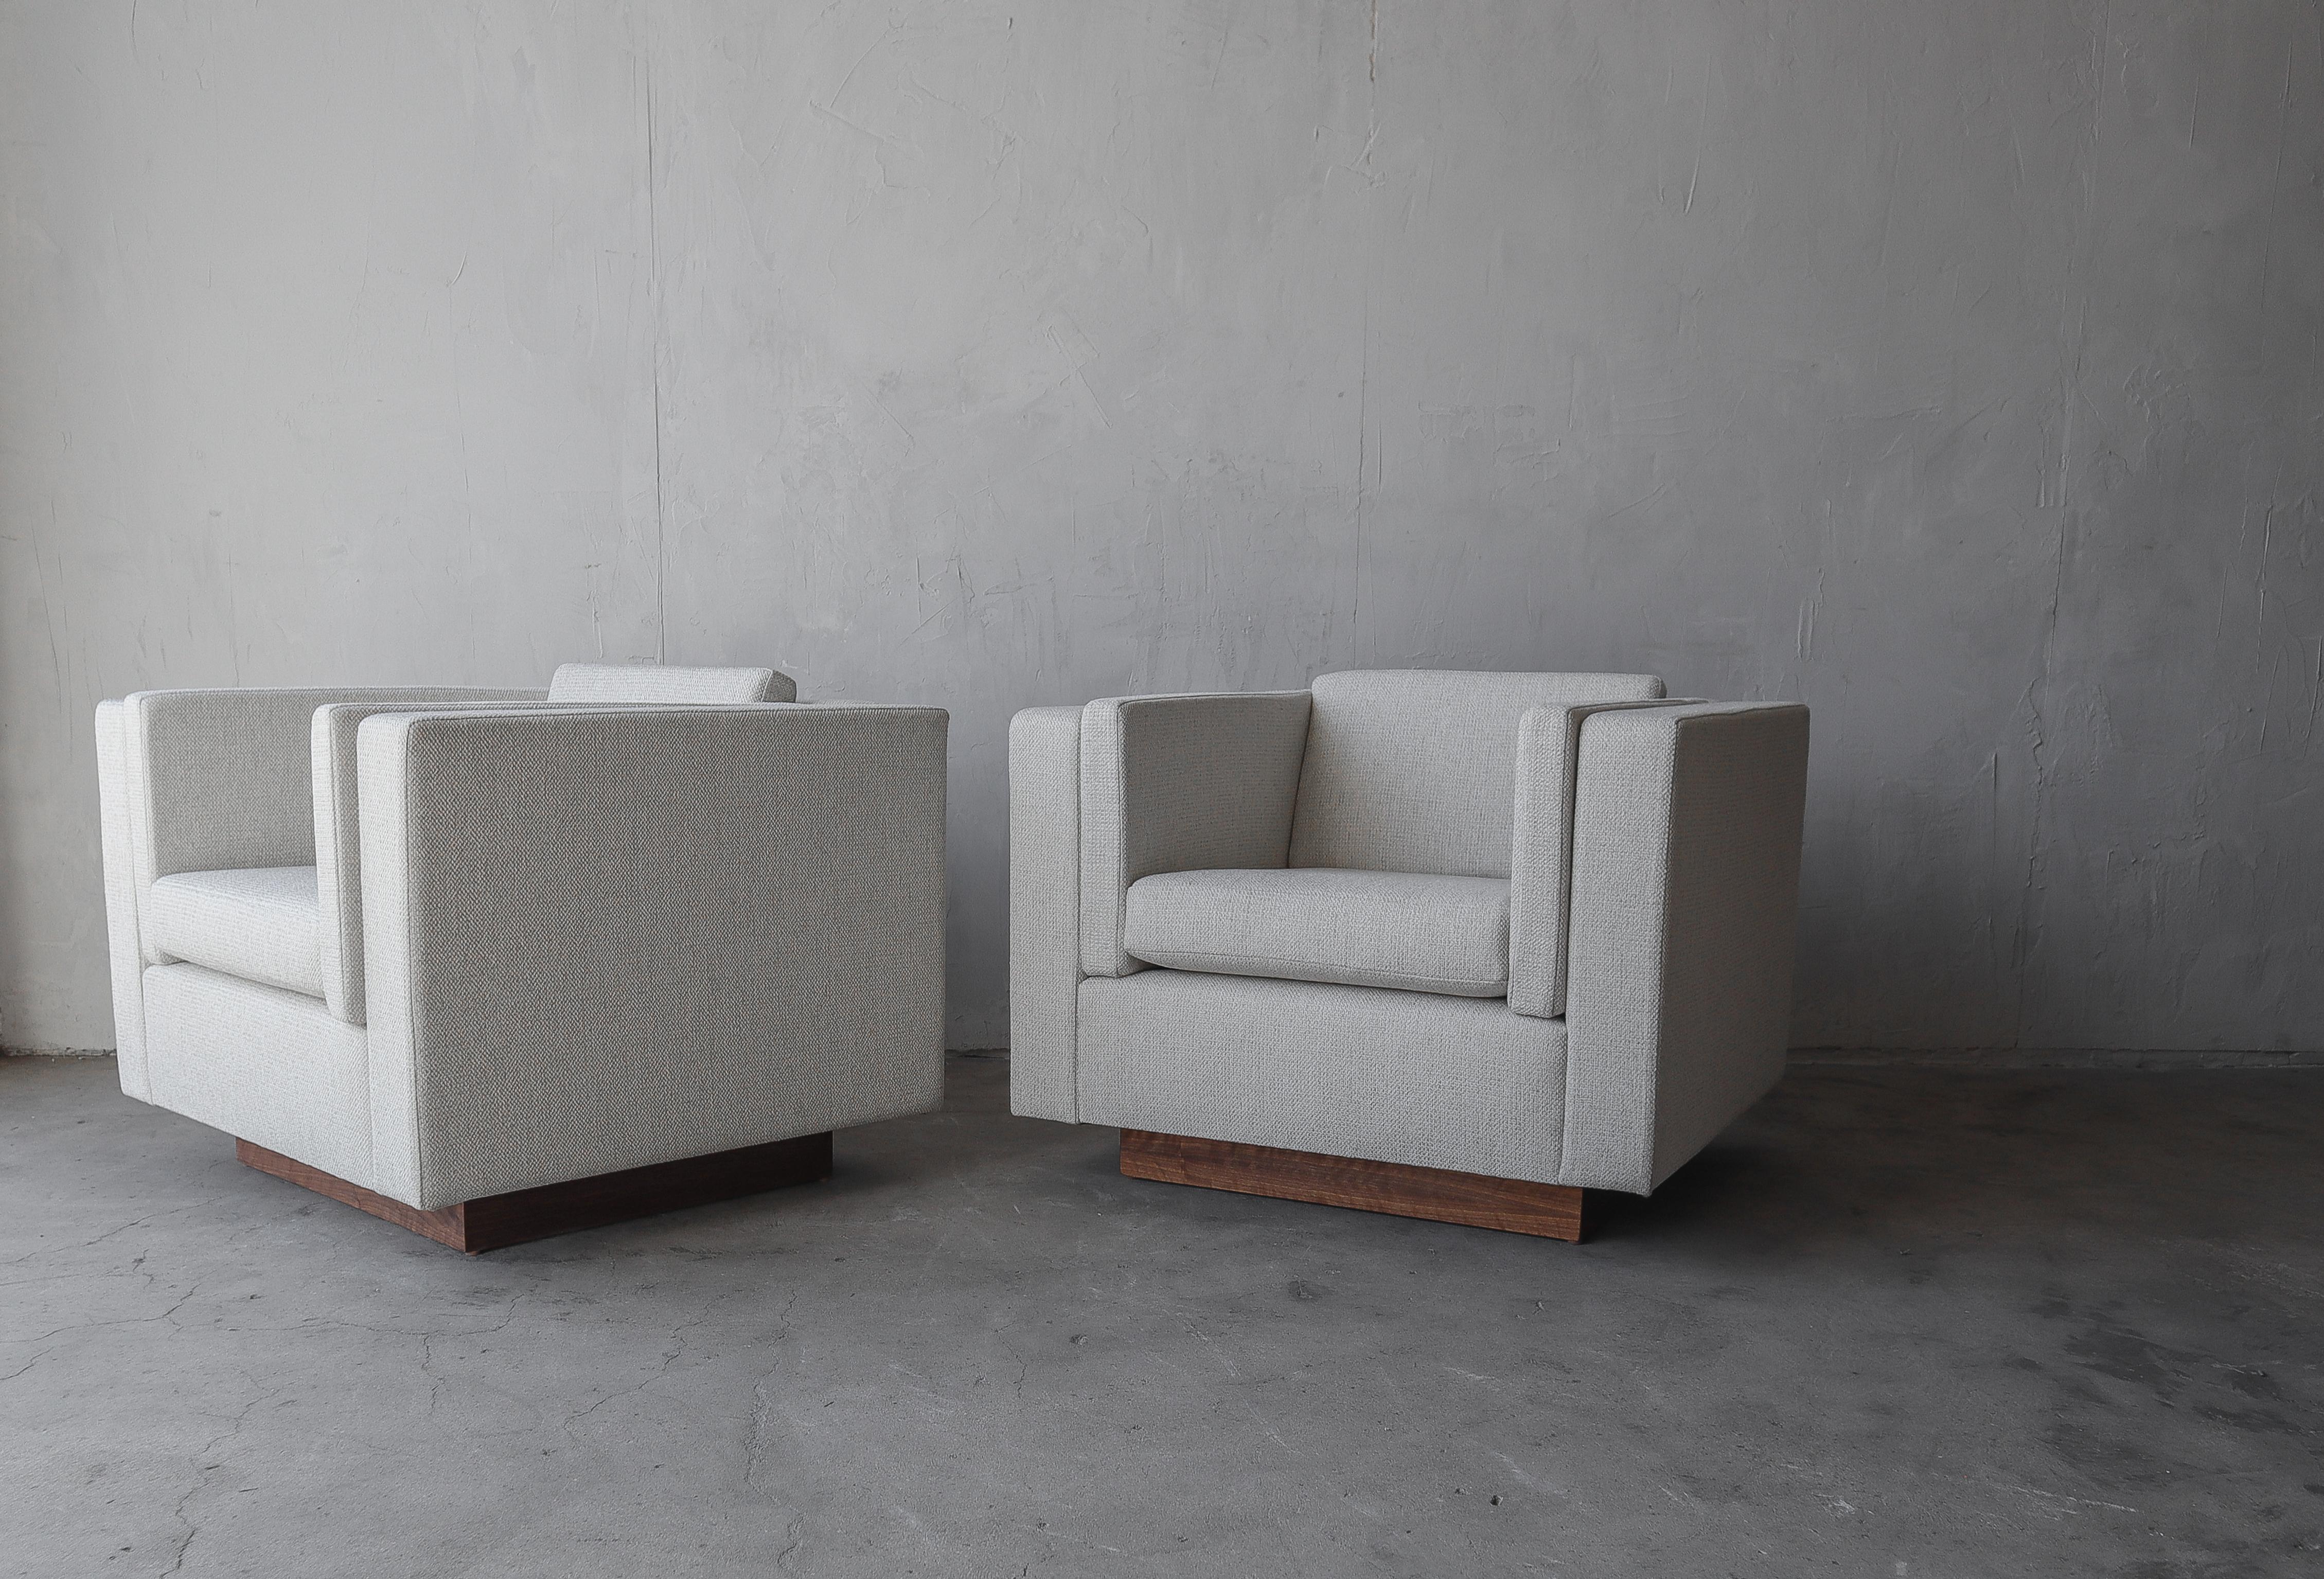 Pair of Cube Chairs with Walnut Plinths In Excellent Condition For Sale In Las Vegas, NV